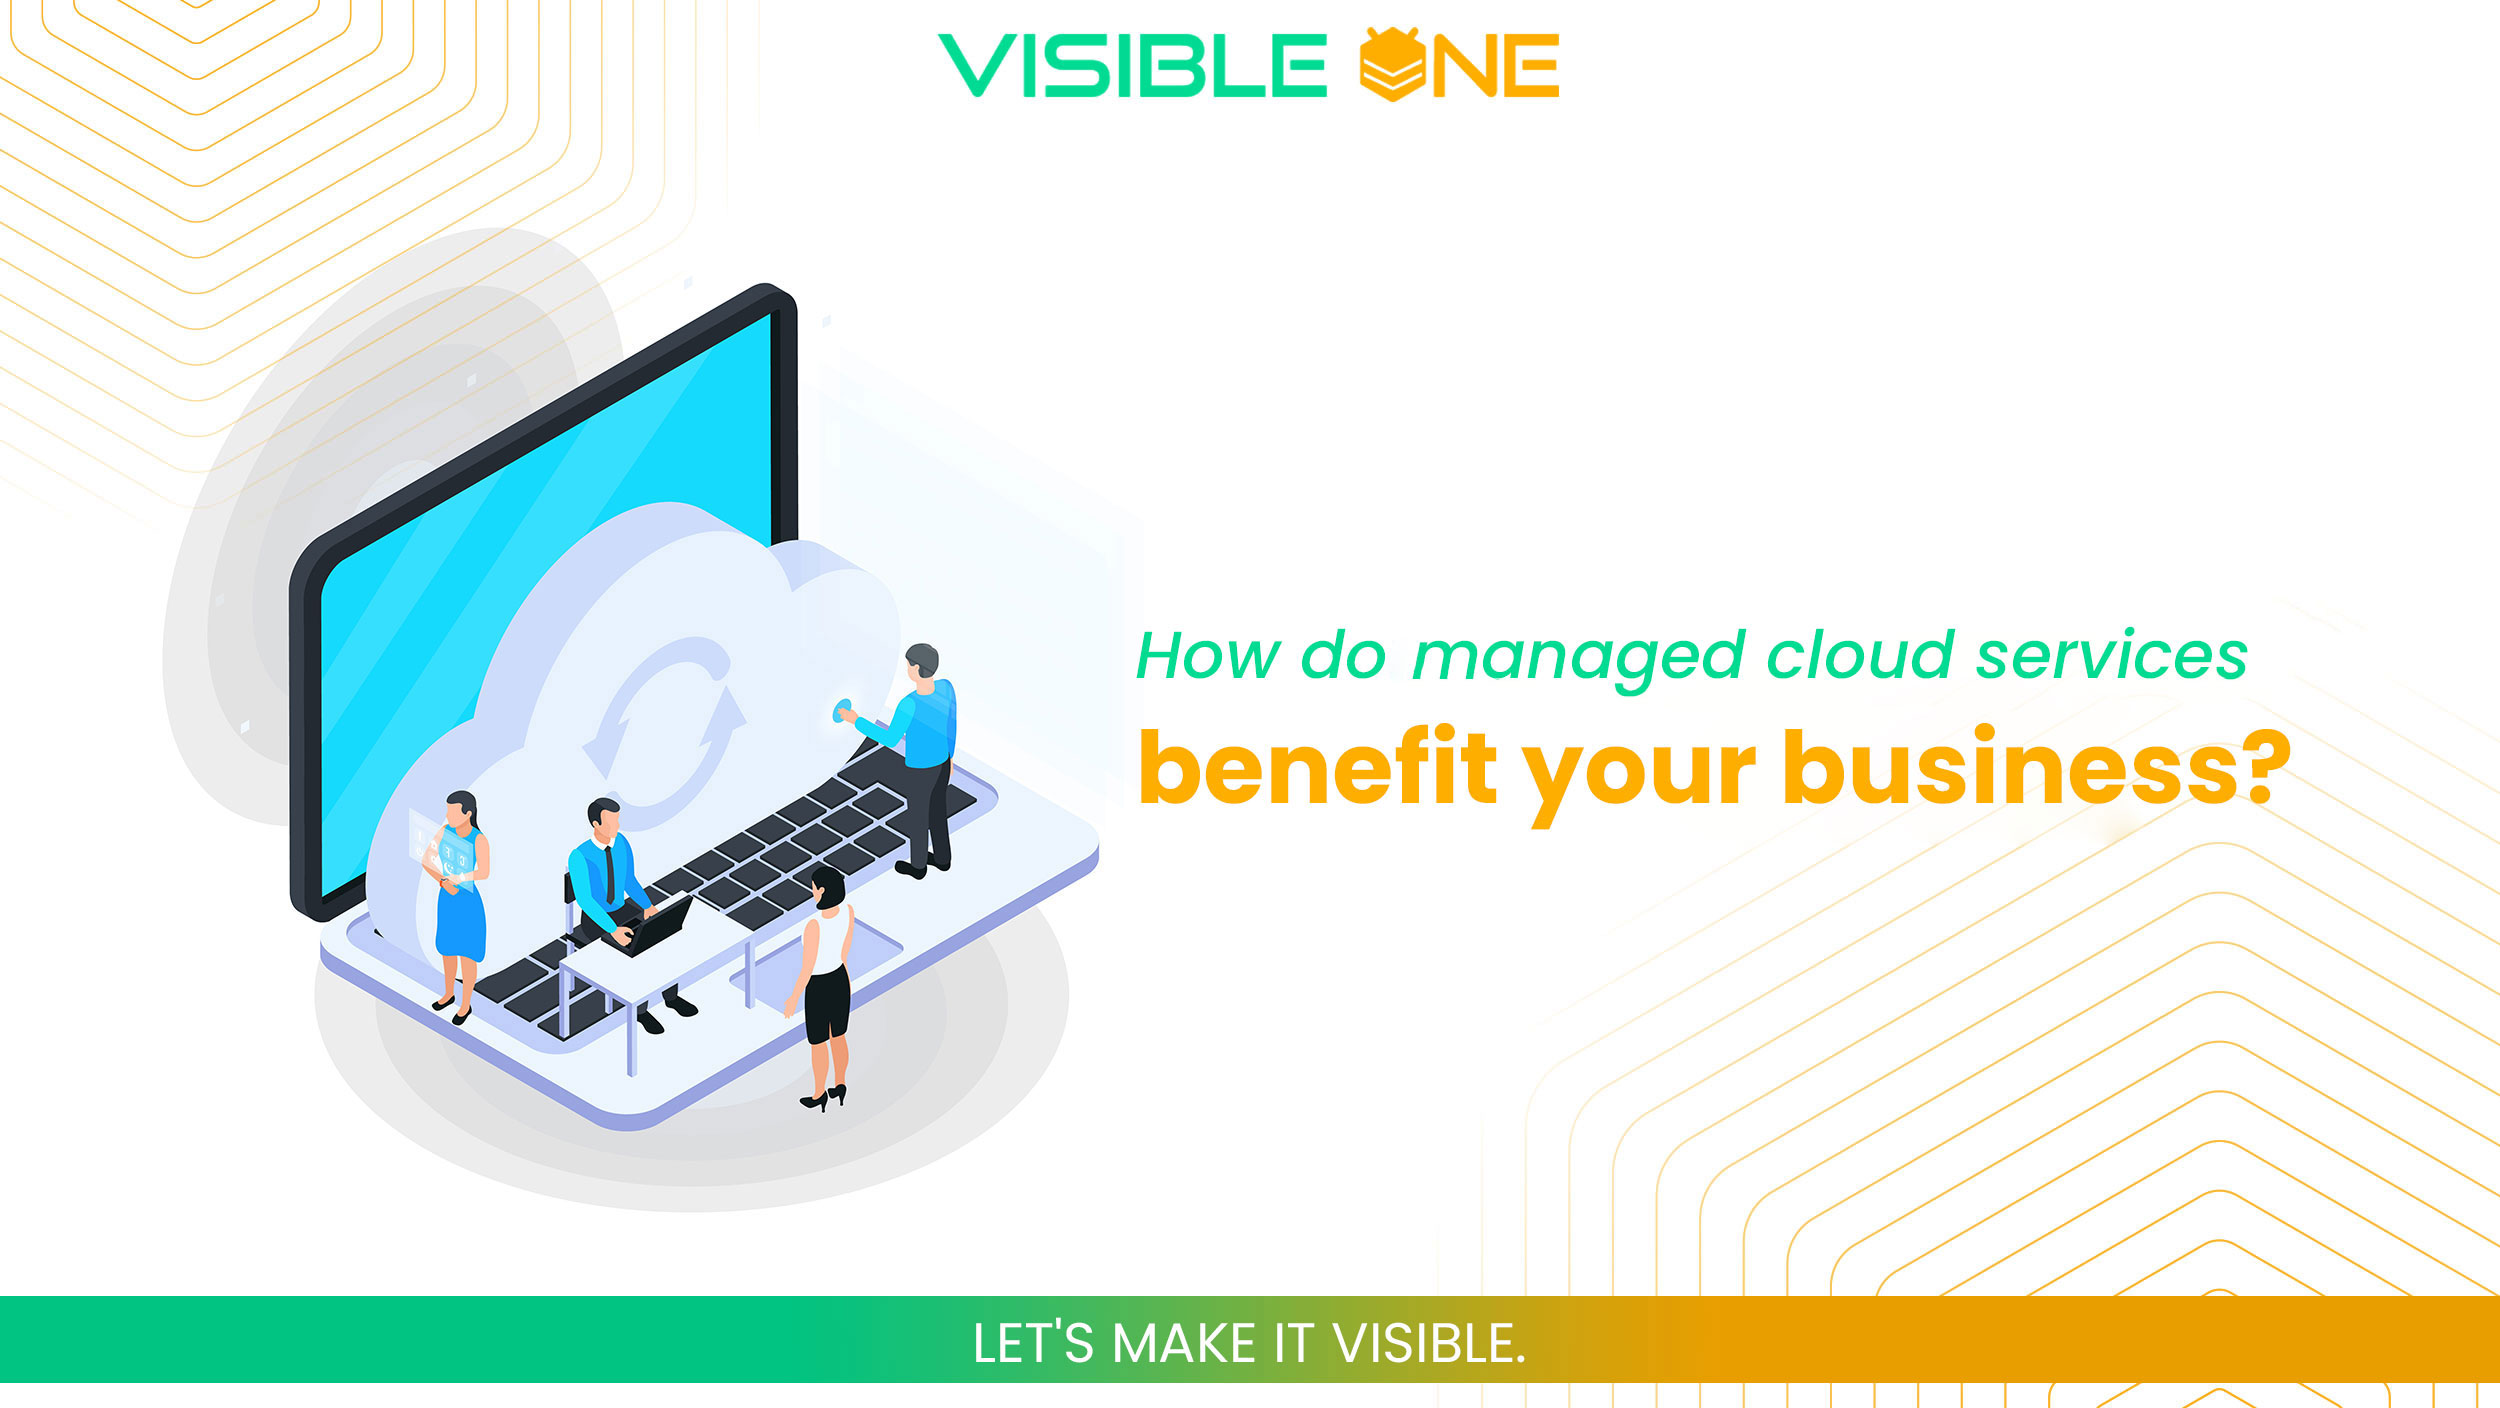 How do managed cloud services benefit your business?